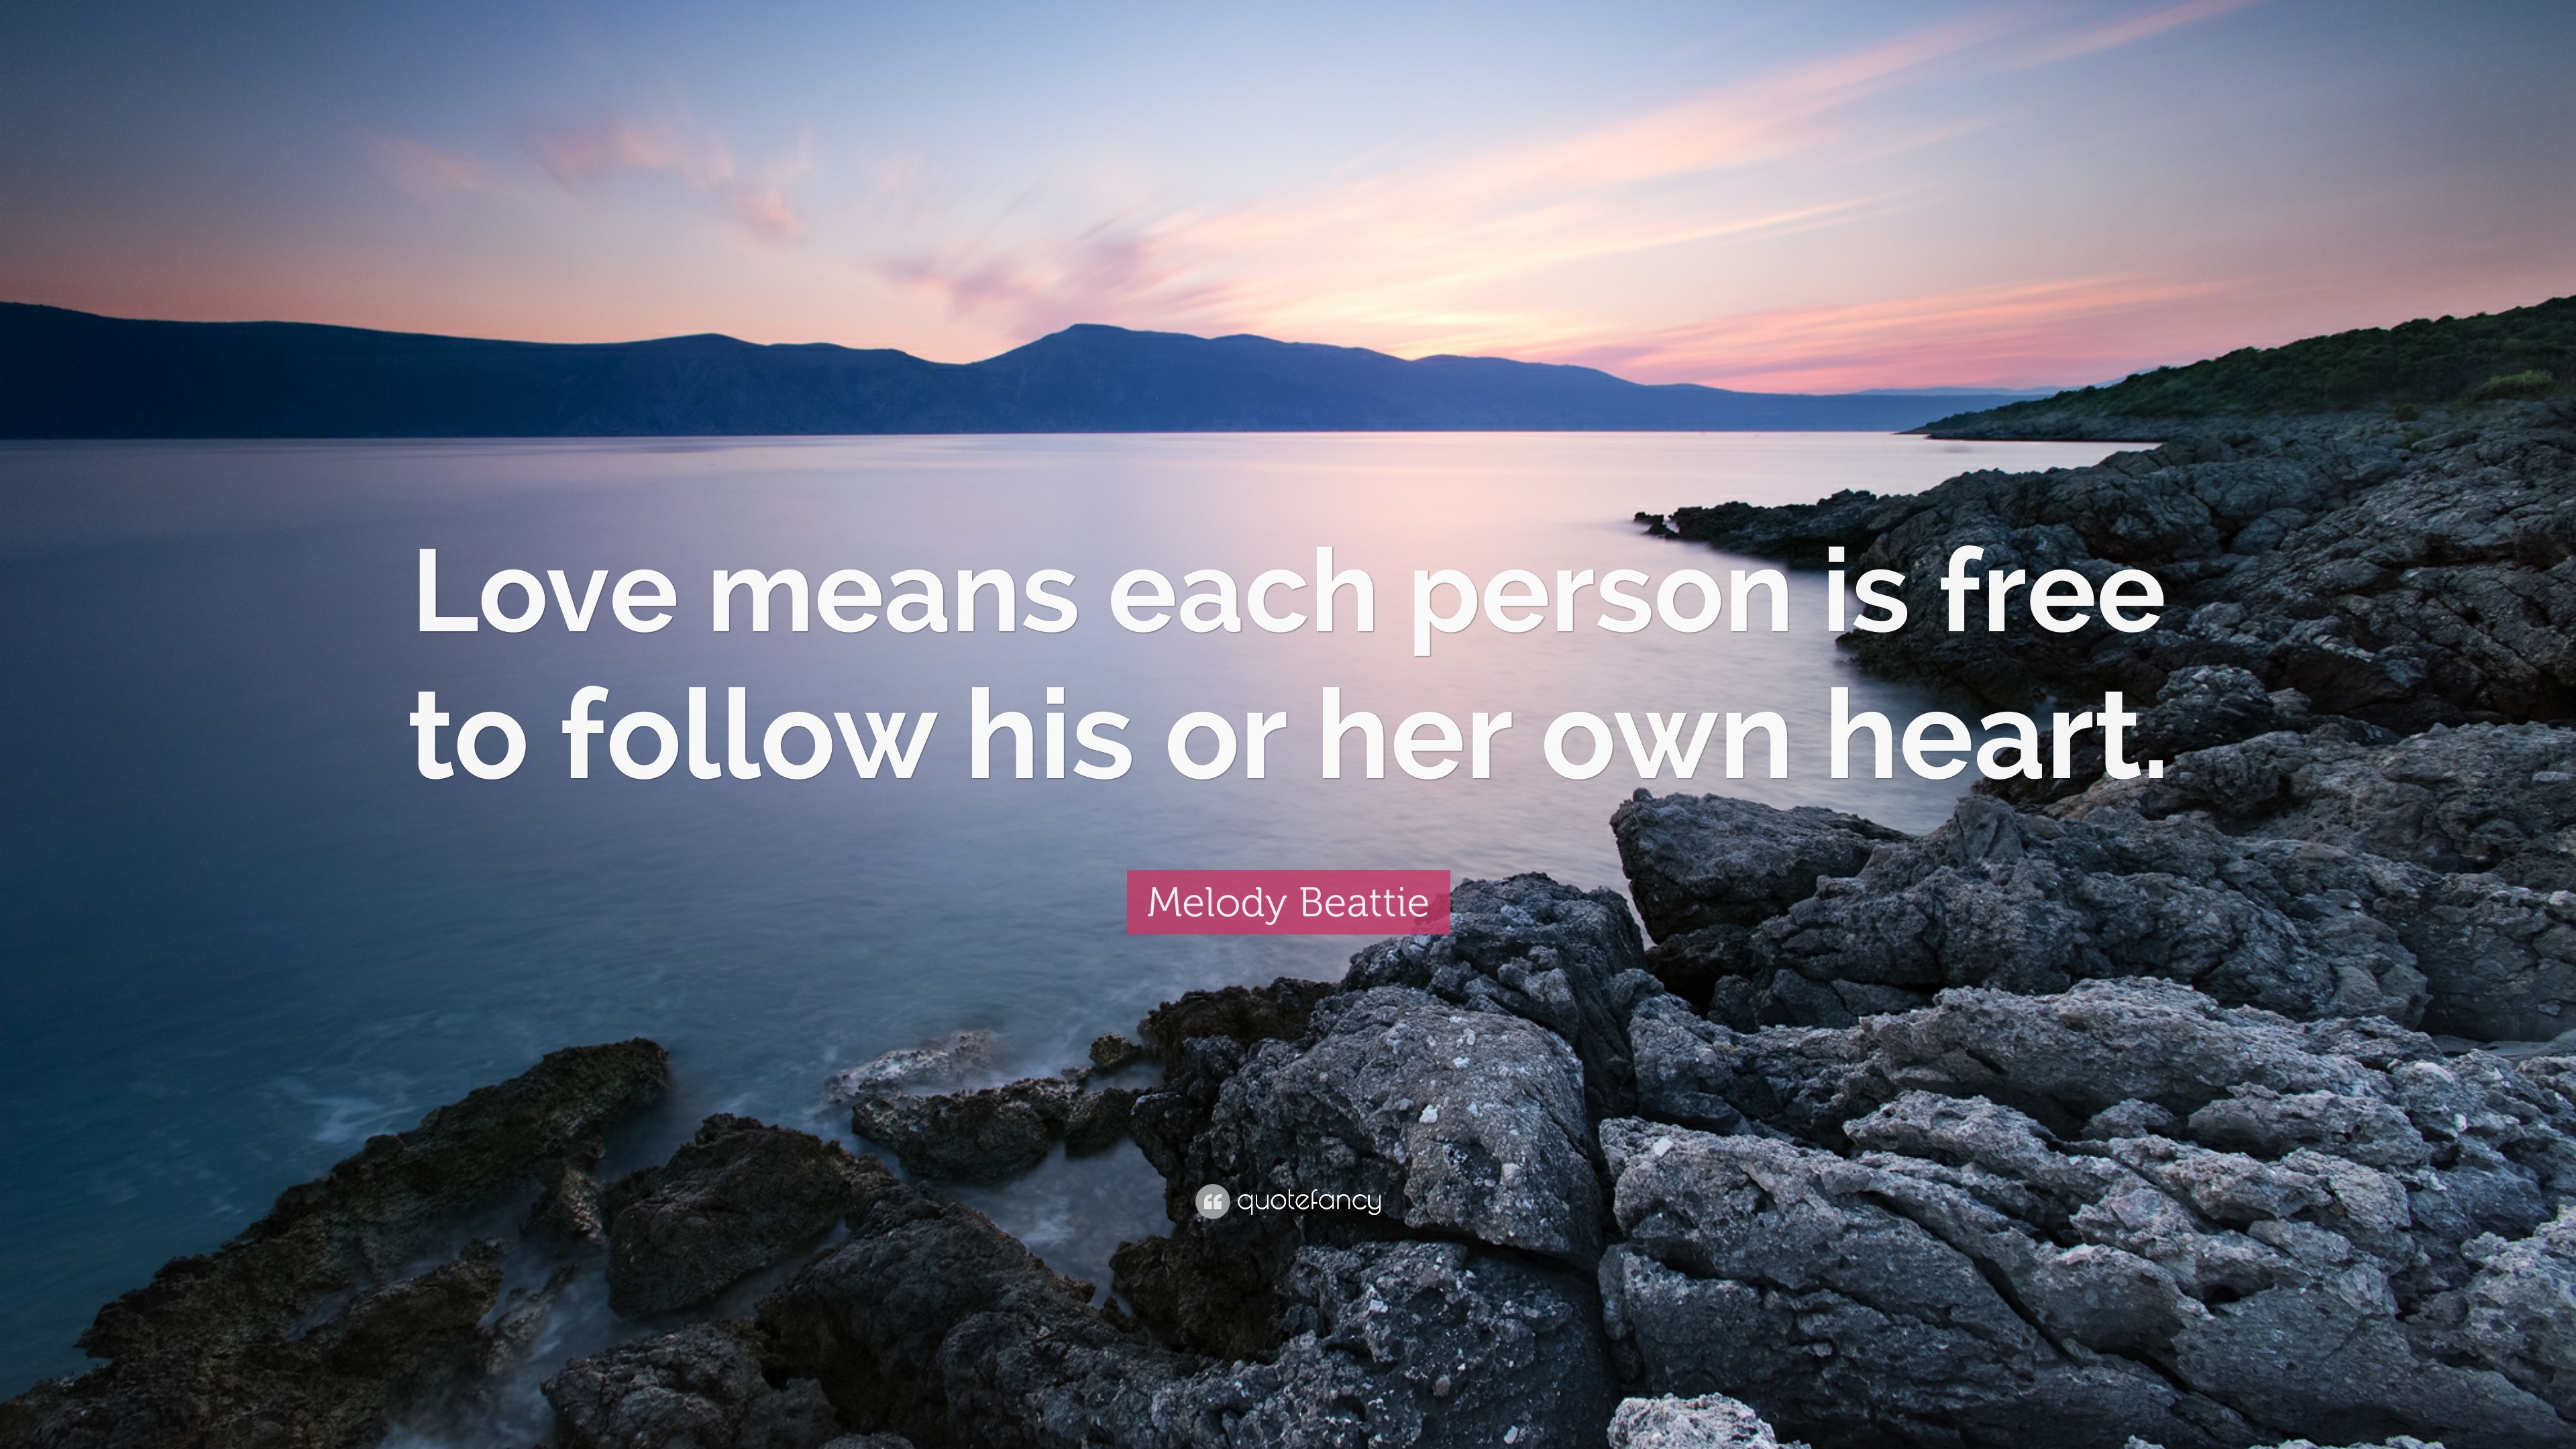 https://quotefancy.com/media/wallpaper/3840x2160/413991-Melody-Beattie-Quote-Love-means-each-person-is-free-to-follow-his.jpg